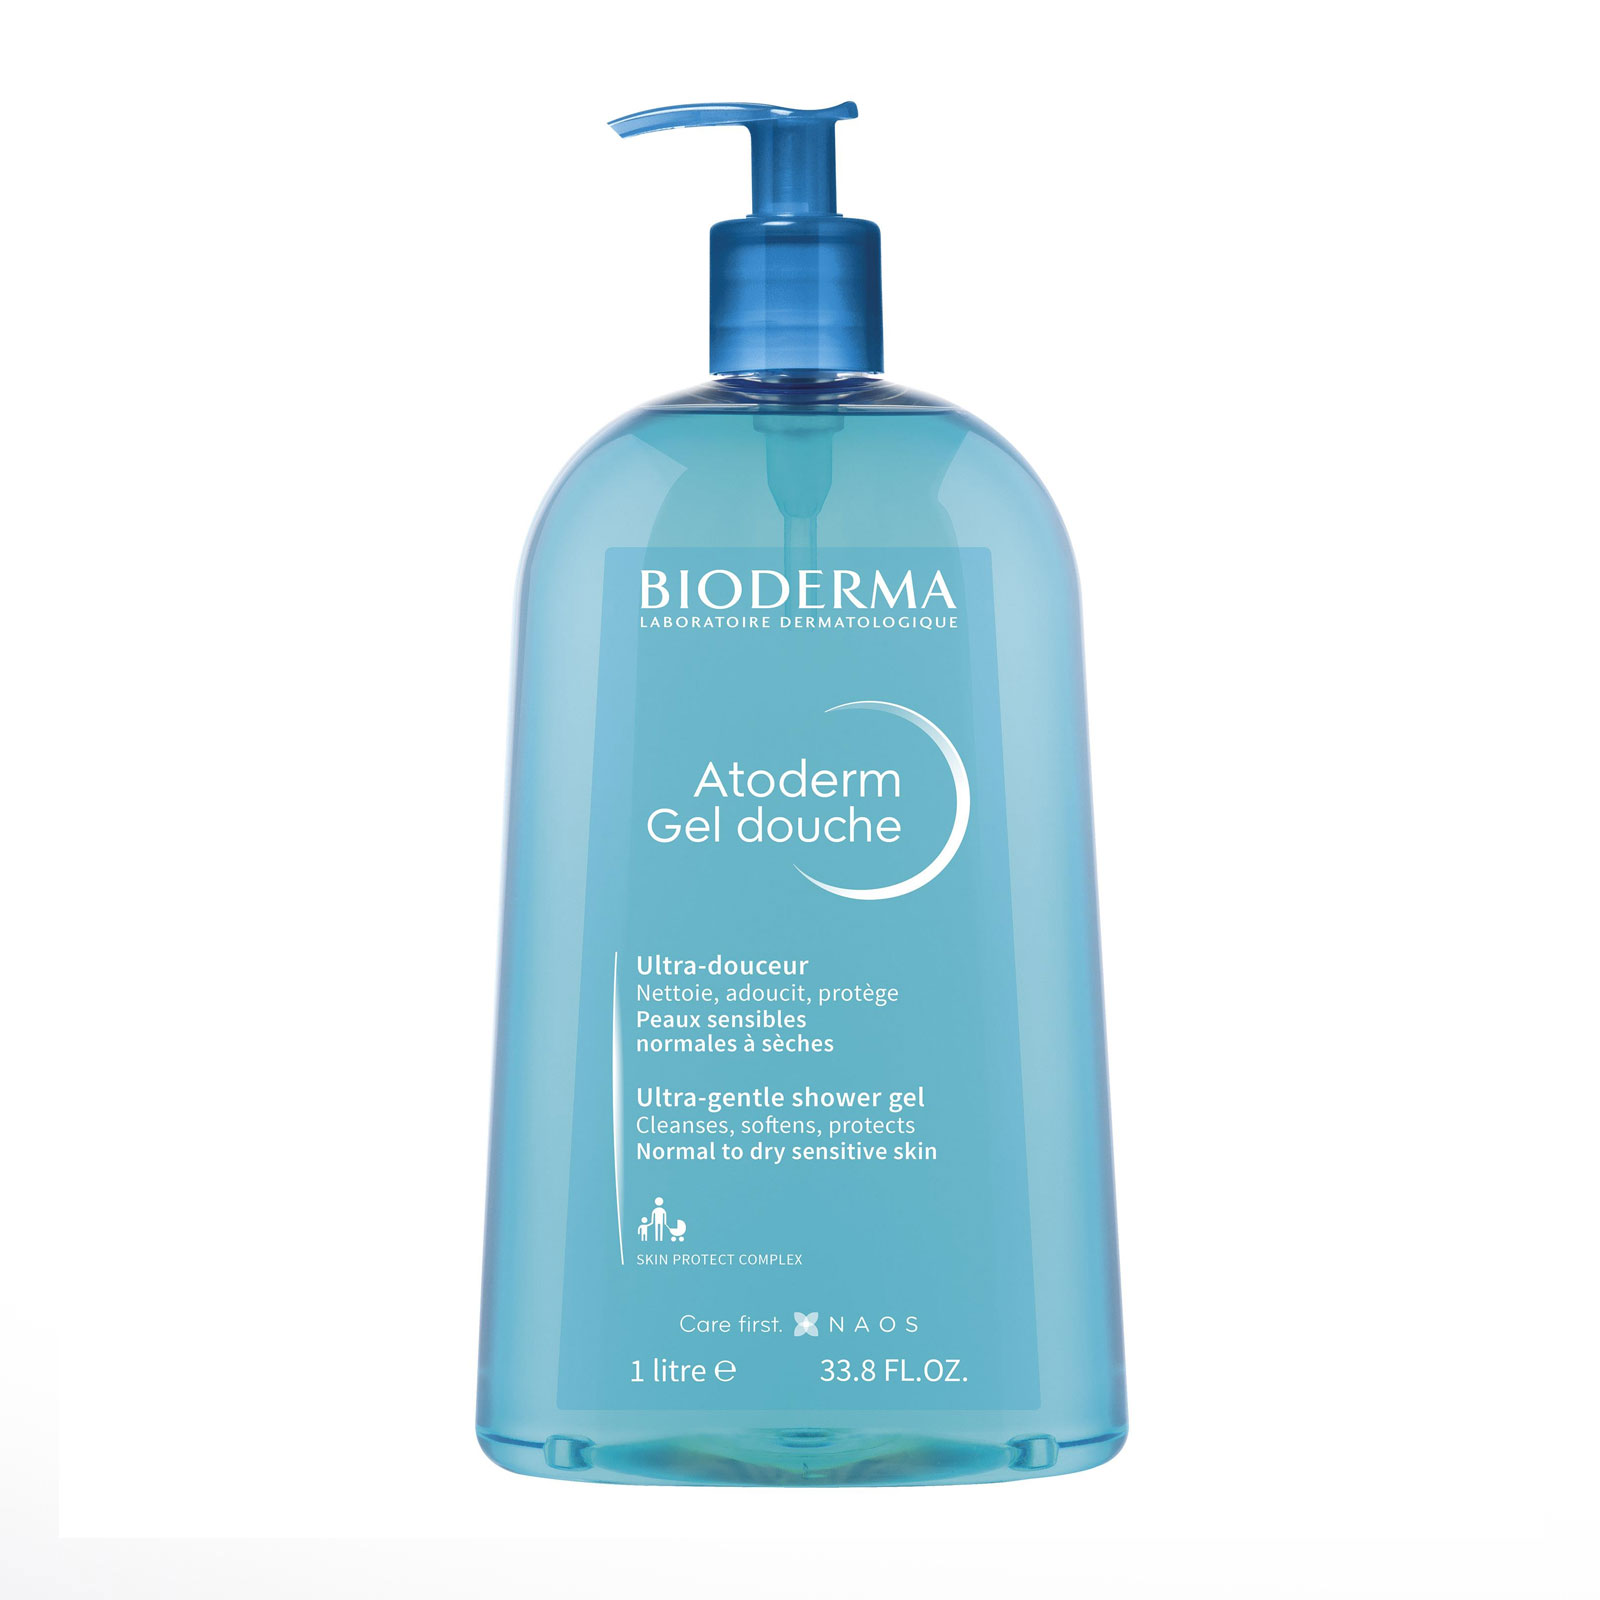 Bioderma Atoderm Face And Body Shower Gel 1000Ml